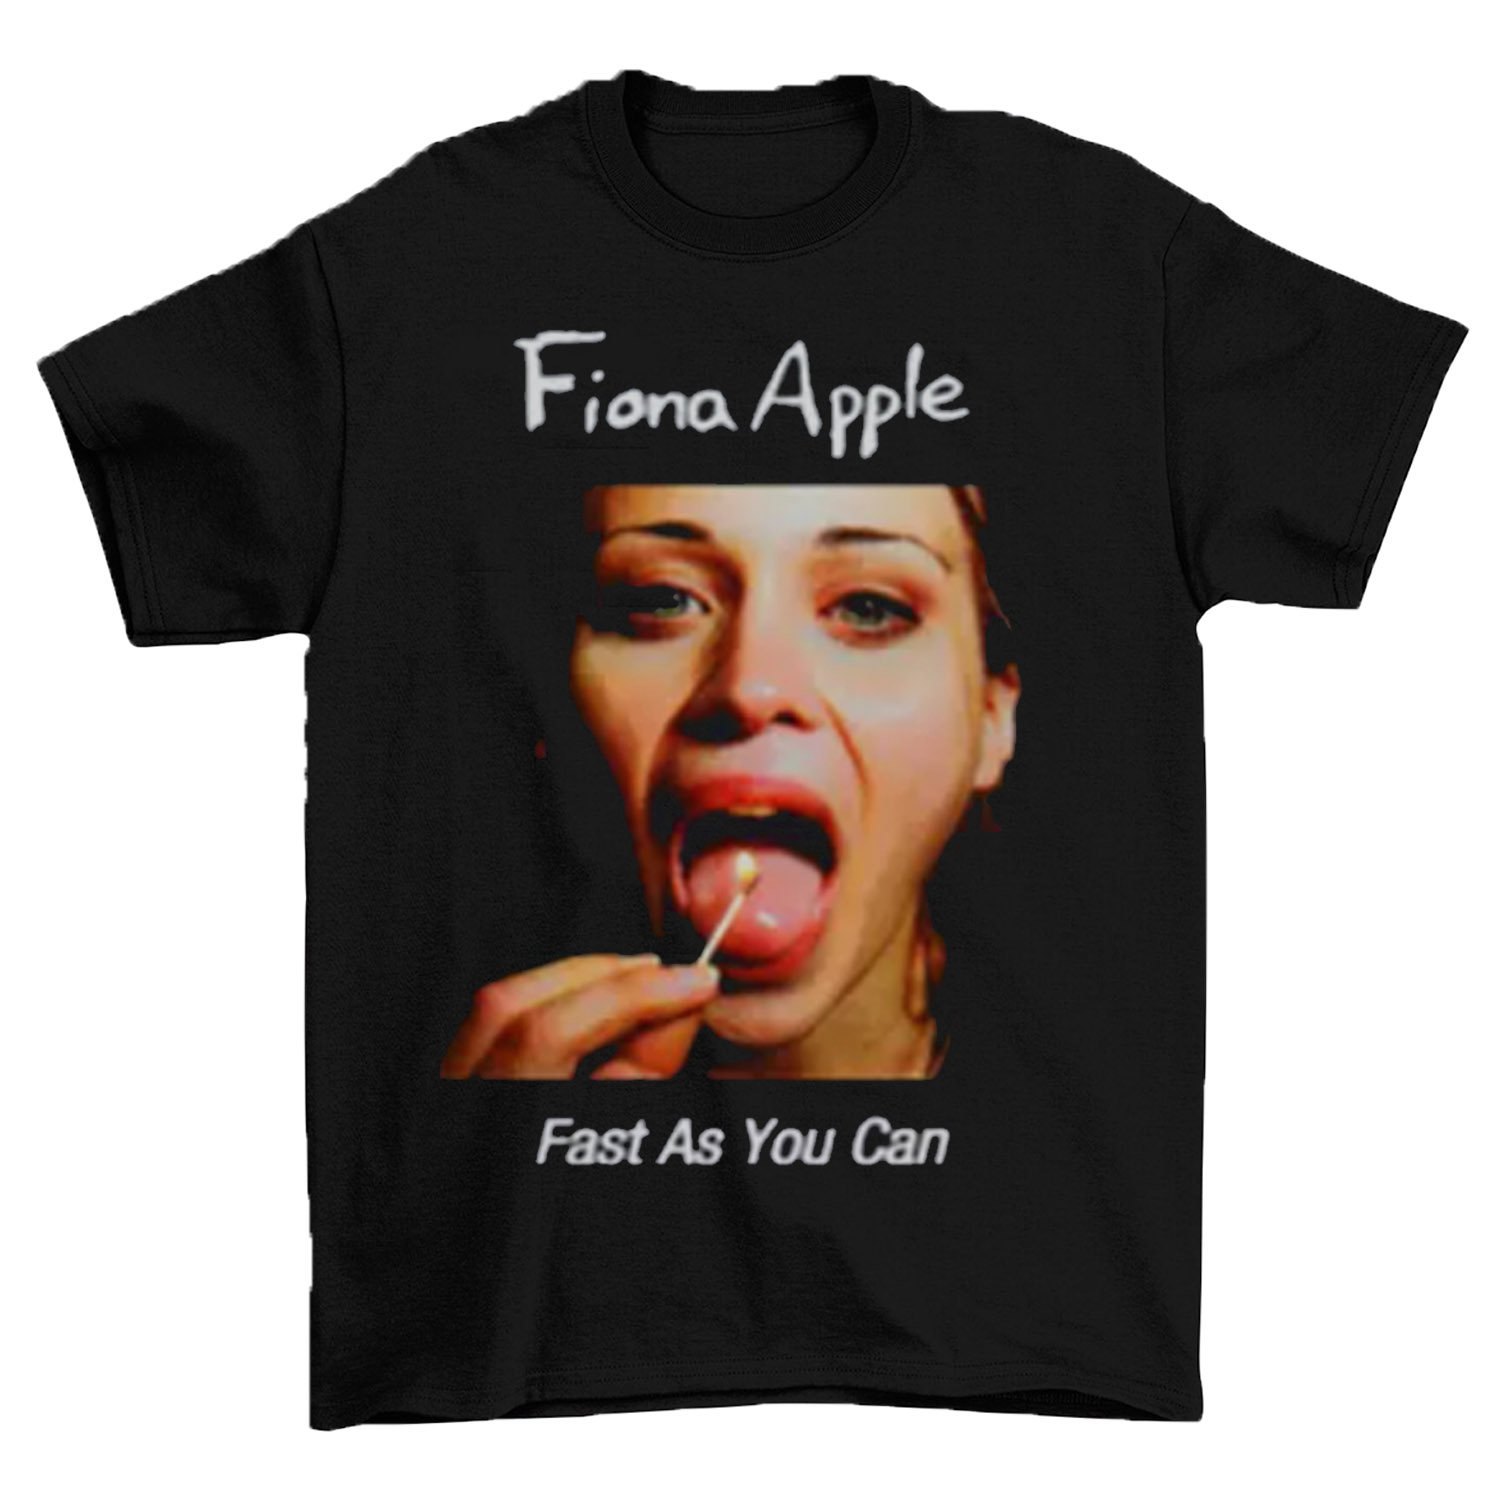 T-Shirt Clothing Fiona for Fans A%p.p.l.e Singer Fast as You Can Customize Shirt for Kids, Men, Women, Unisex